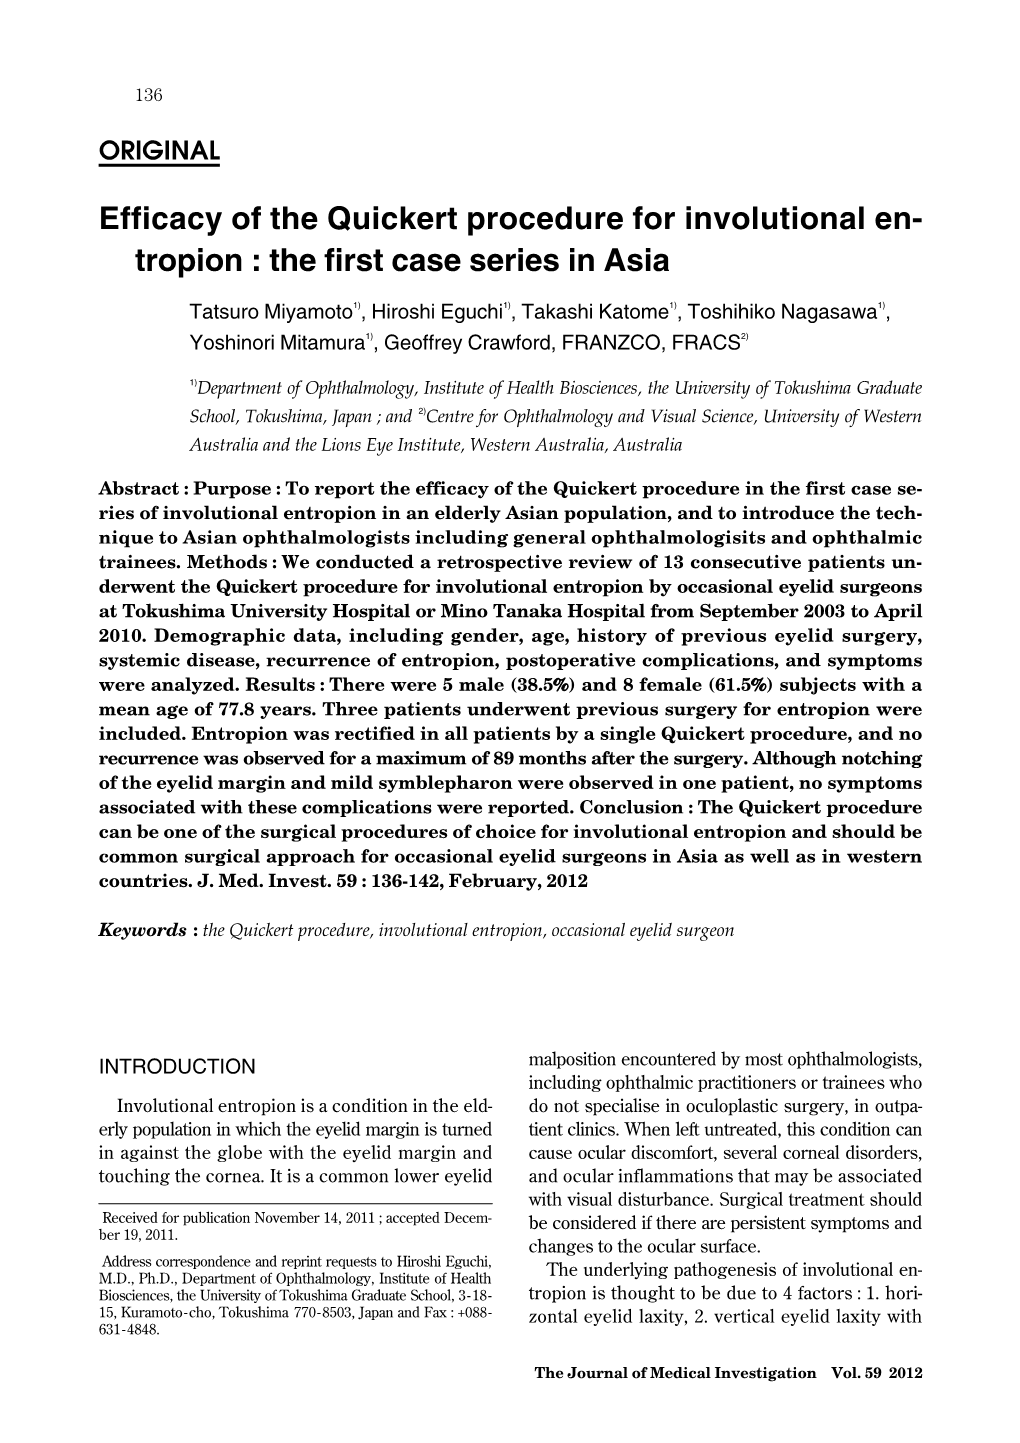 Efficacy of the Quickert Procedure for Involutional En- Tropion : the First Case Series in Asia